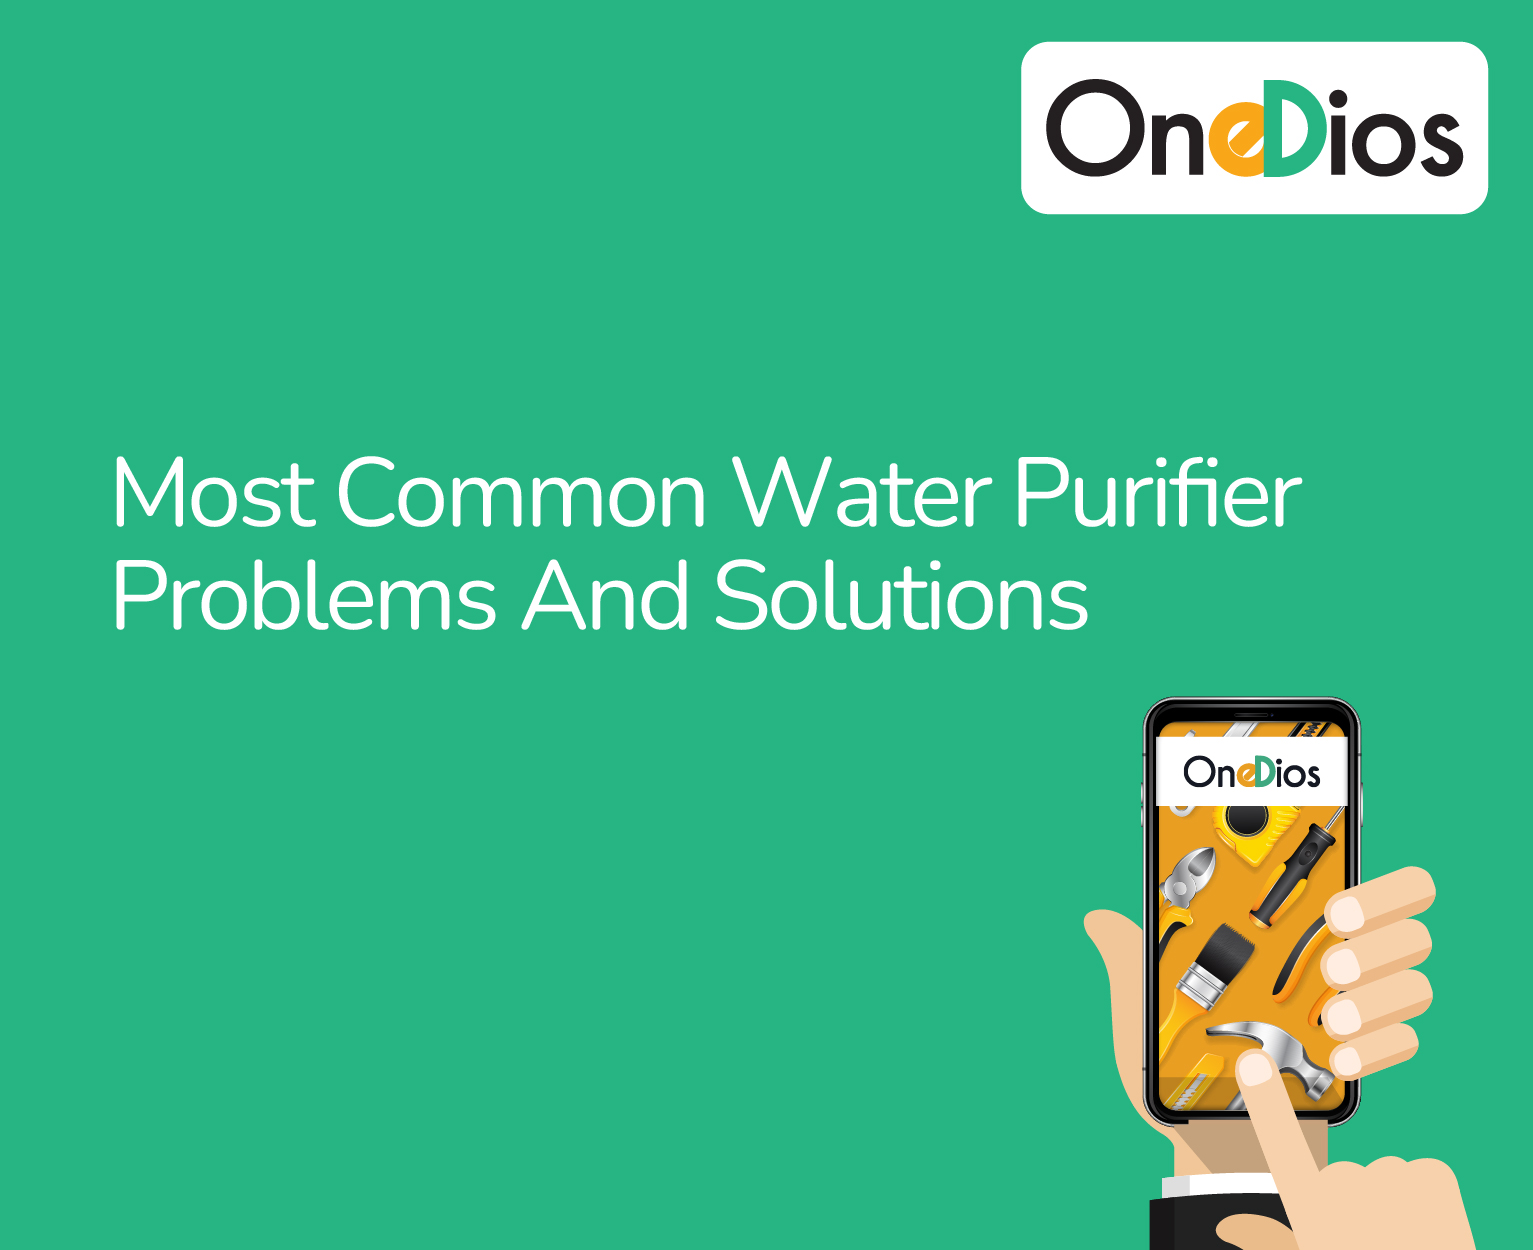 5 Common Water Purifier Problems and Solutions